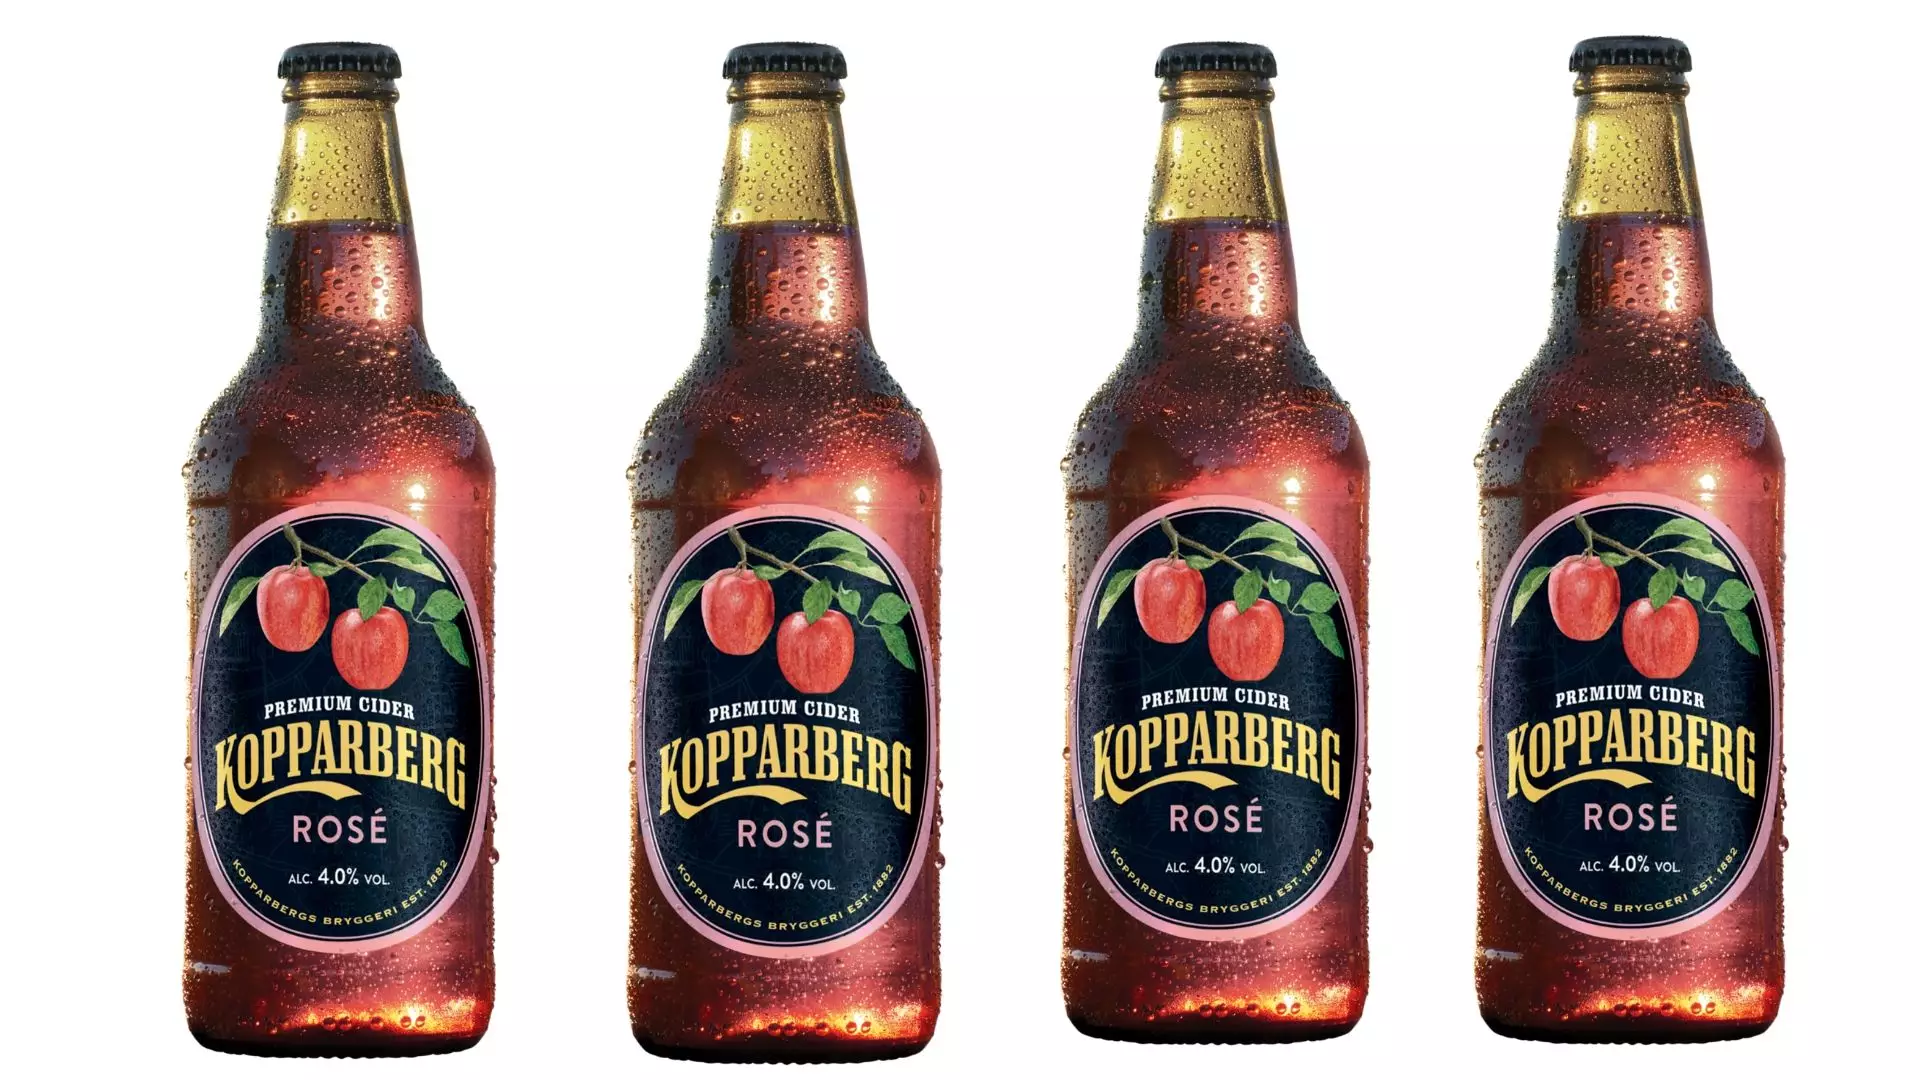 You Can Now Buy Kopparberg Rosé Cider And It's A Late Entry For The Drink Of The Summer